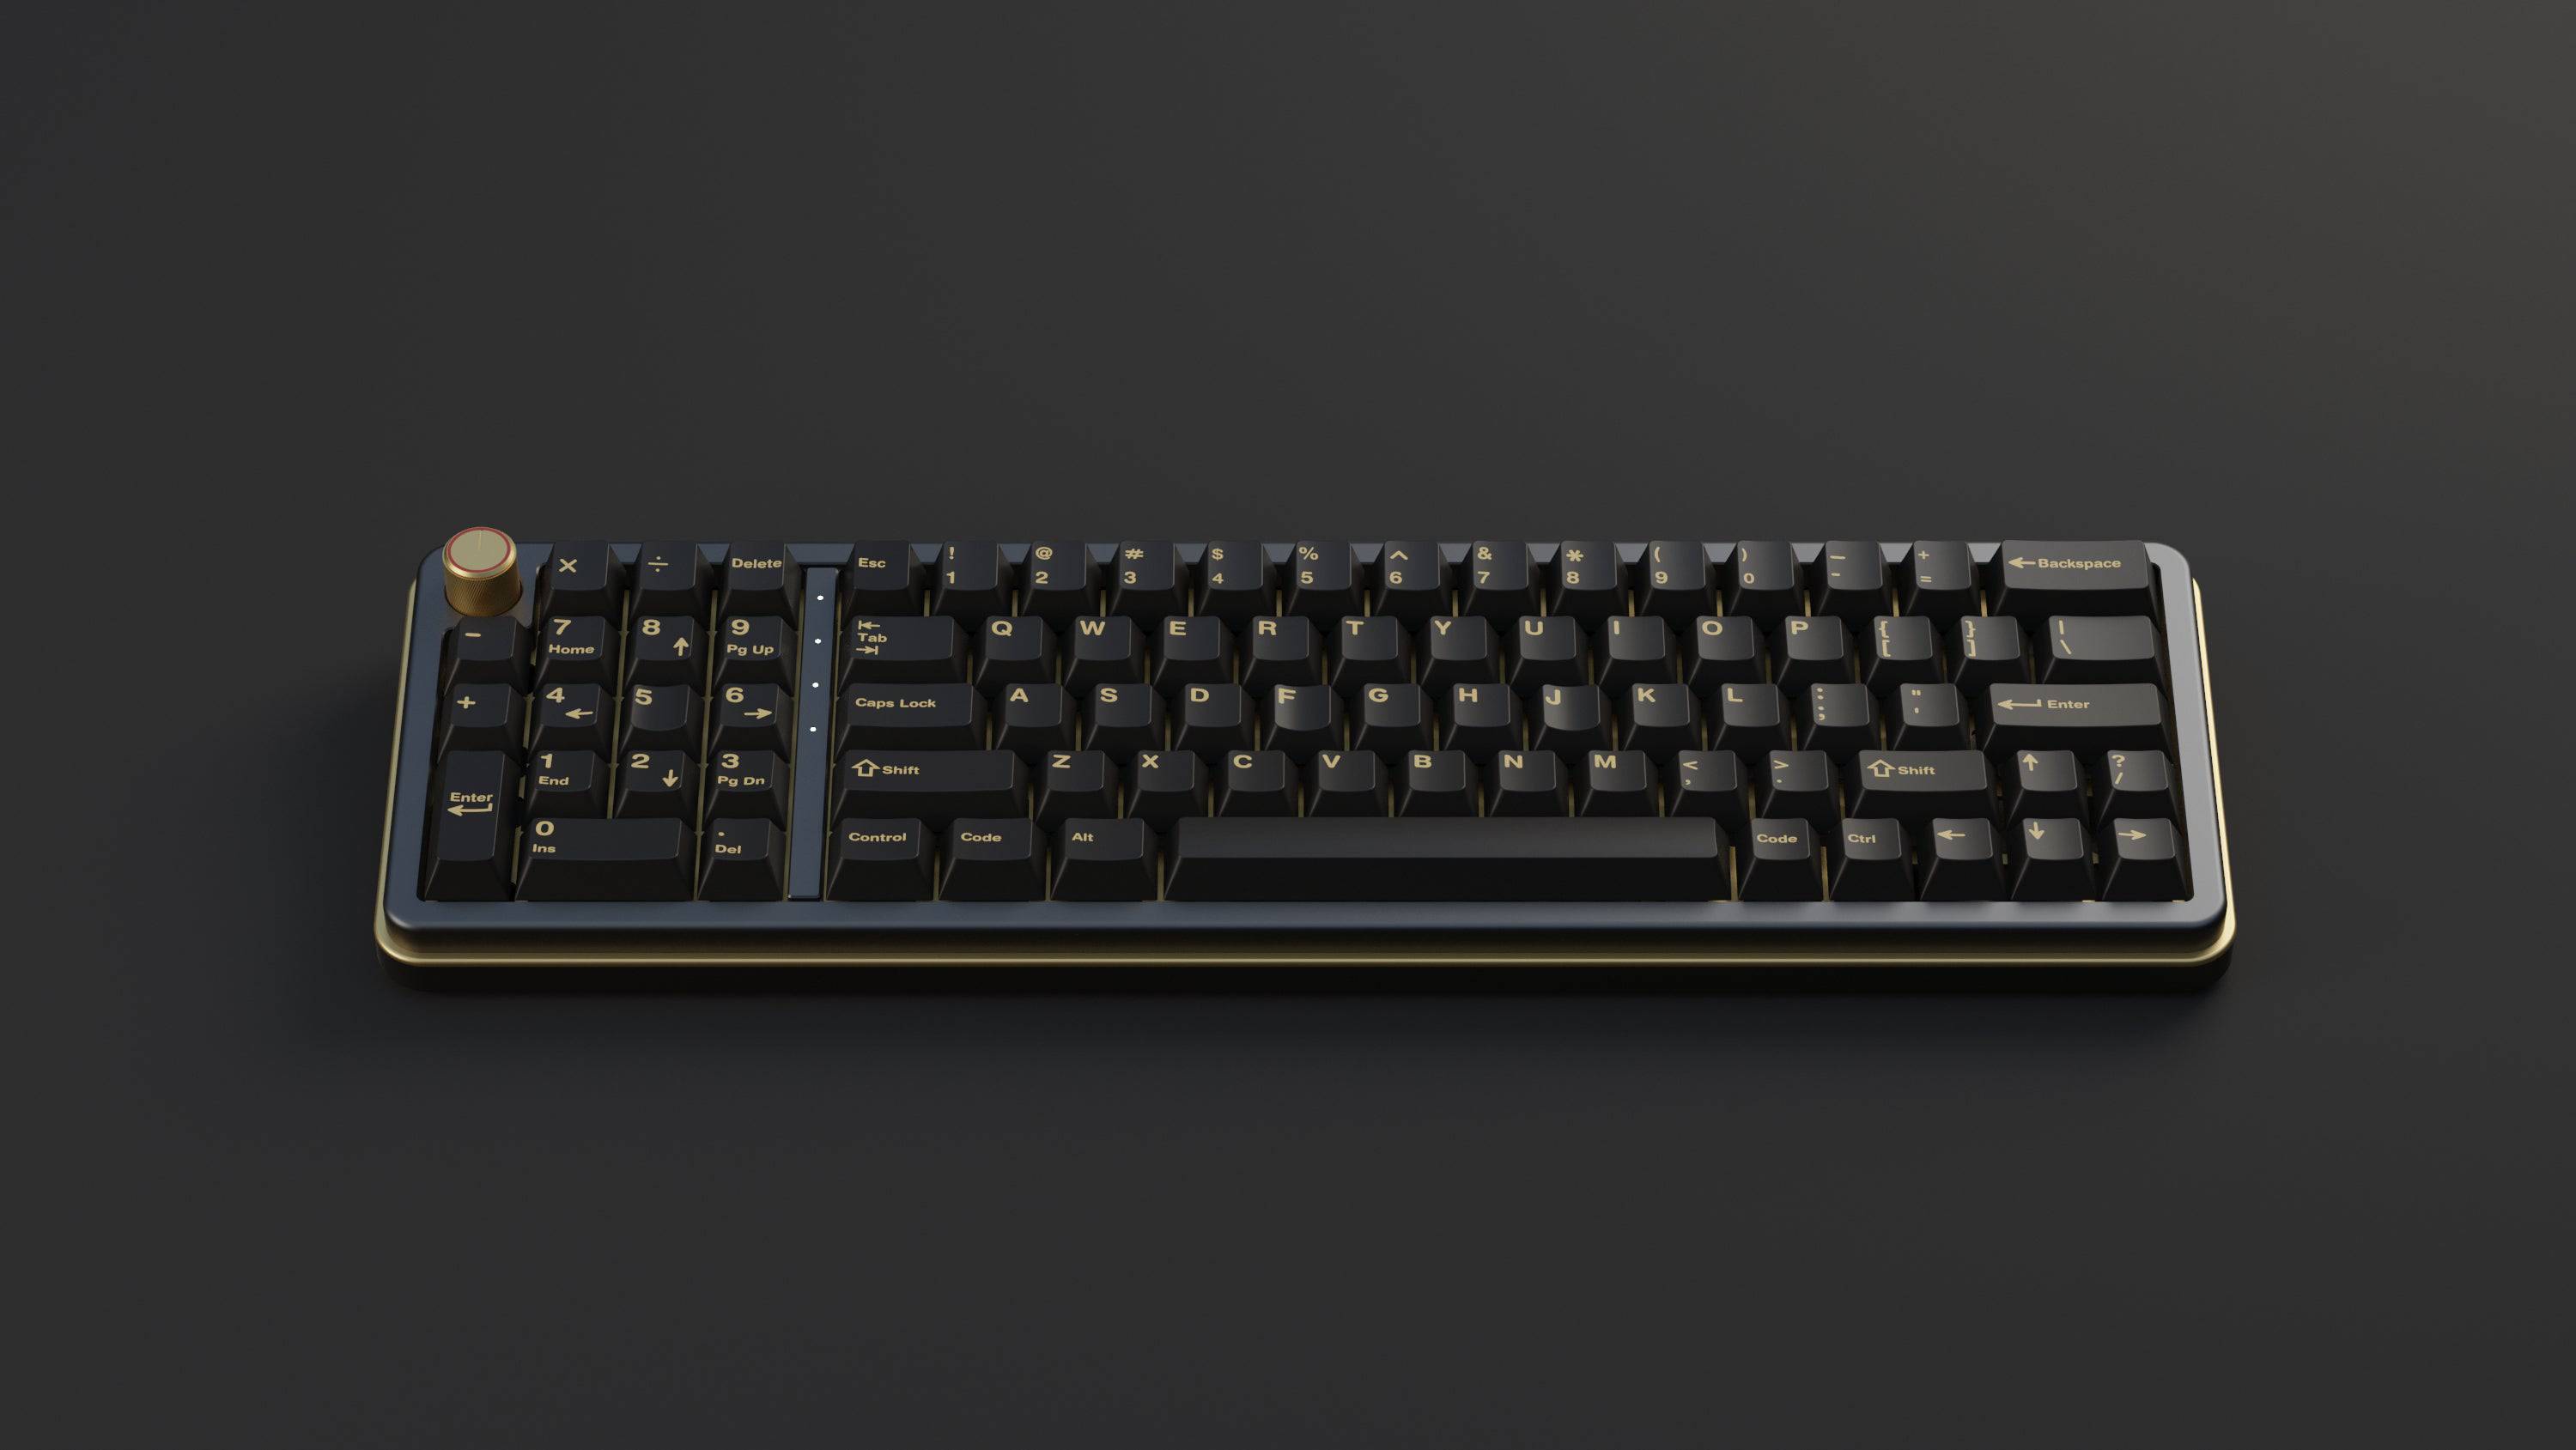 Viendi 8L full keyboard shown in the Shadow color variant proxied by KeebsForAll